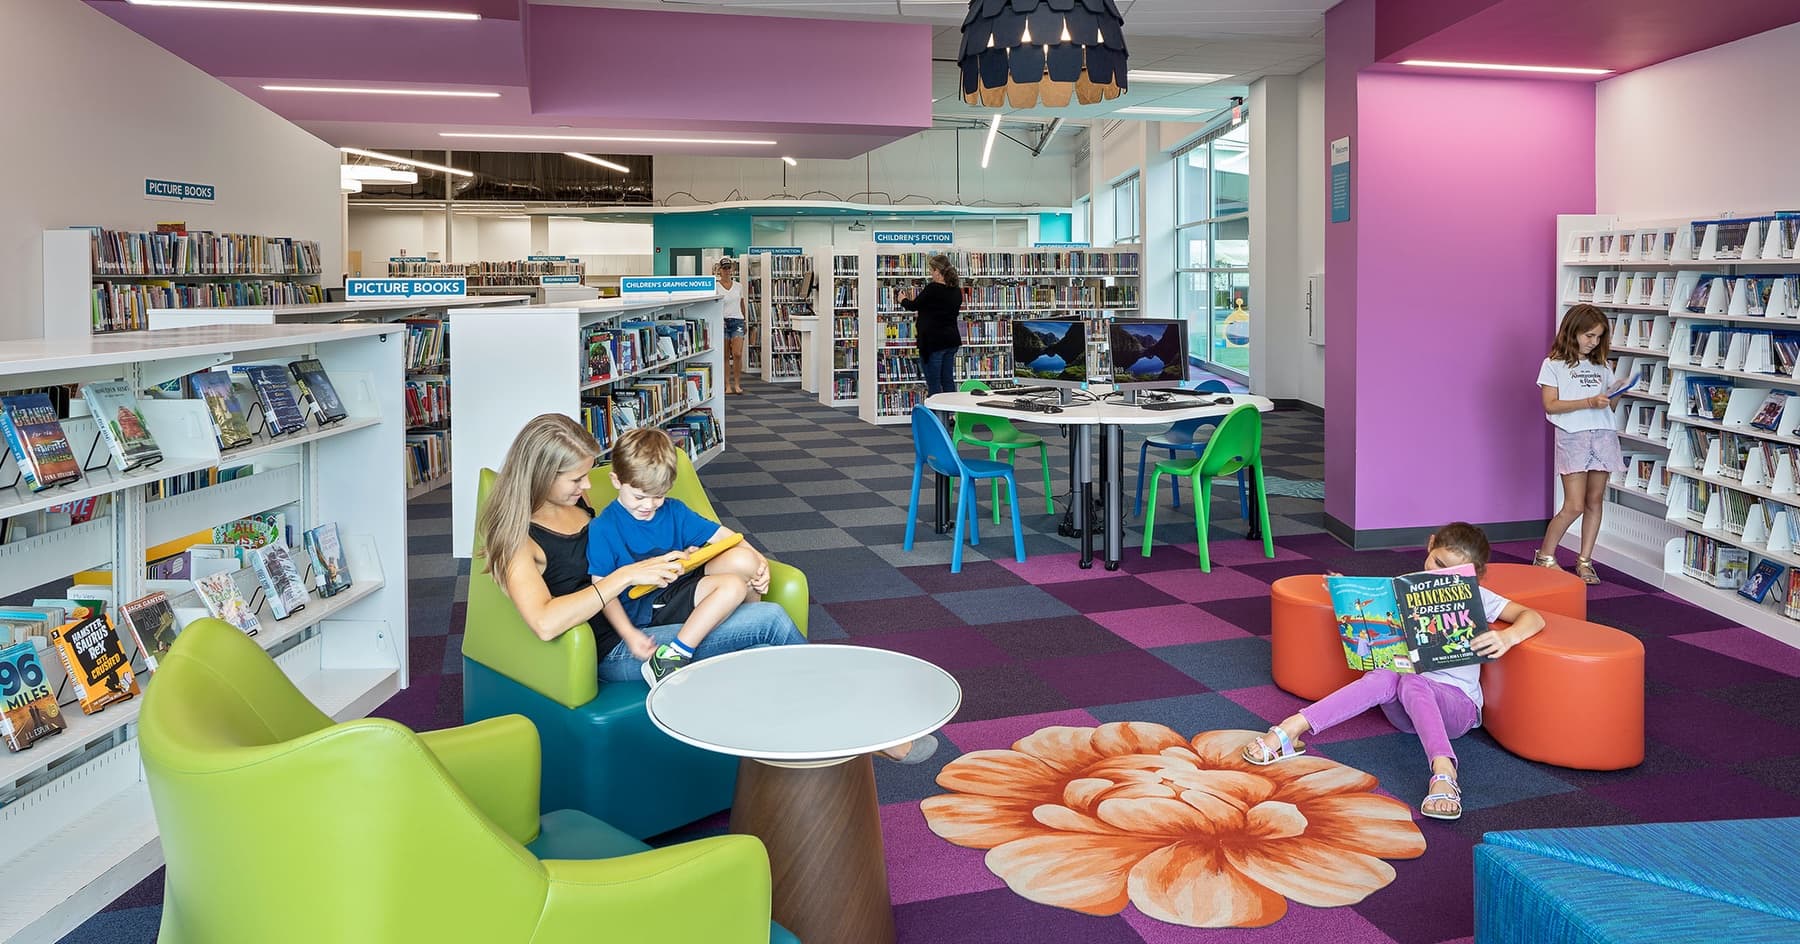 Boudreaux architects worked with Richland Library Southeast to create an engaging space for children’s books